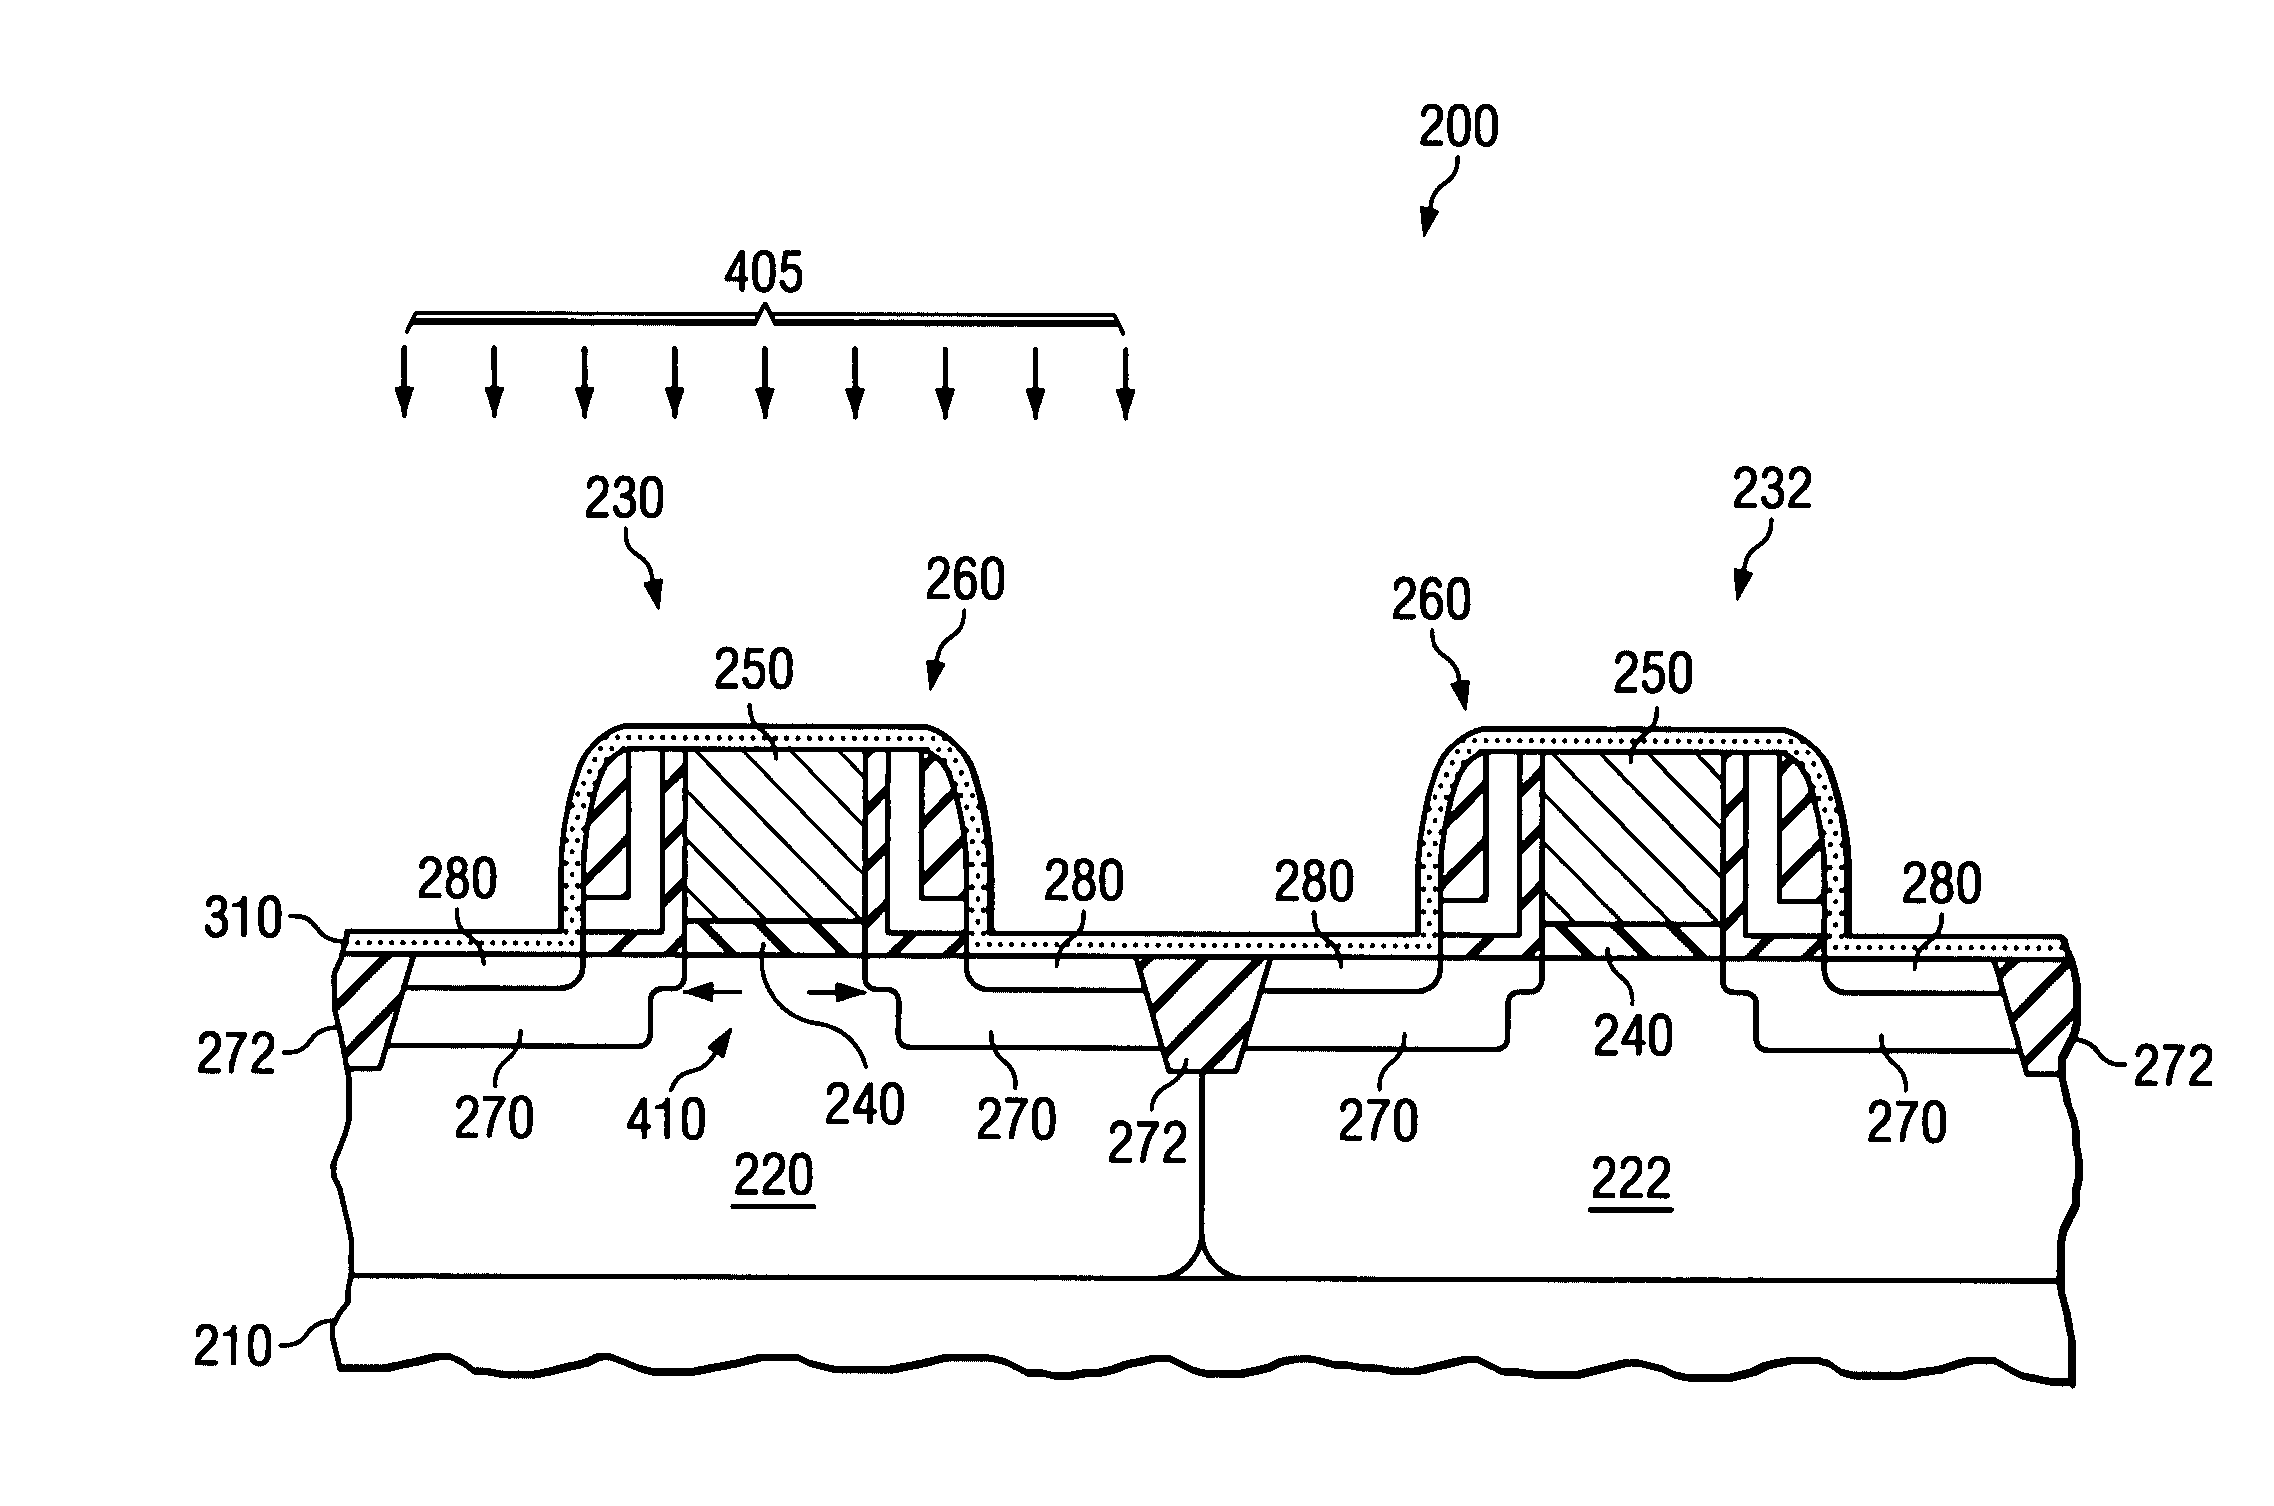 Method of fabricating a microelectronic device using electron beam treatment to induce stress